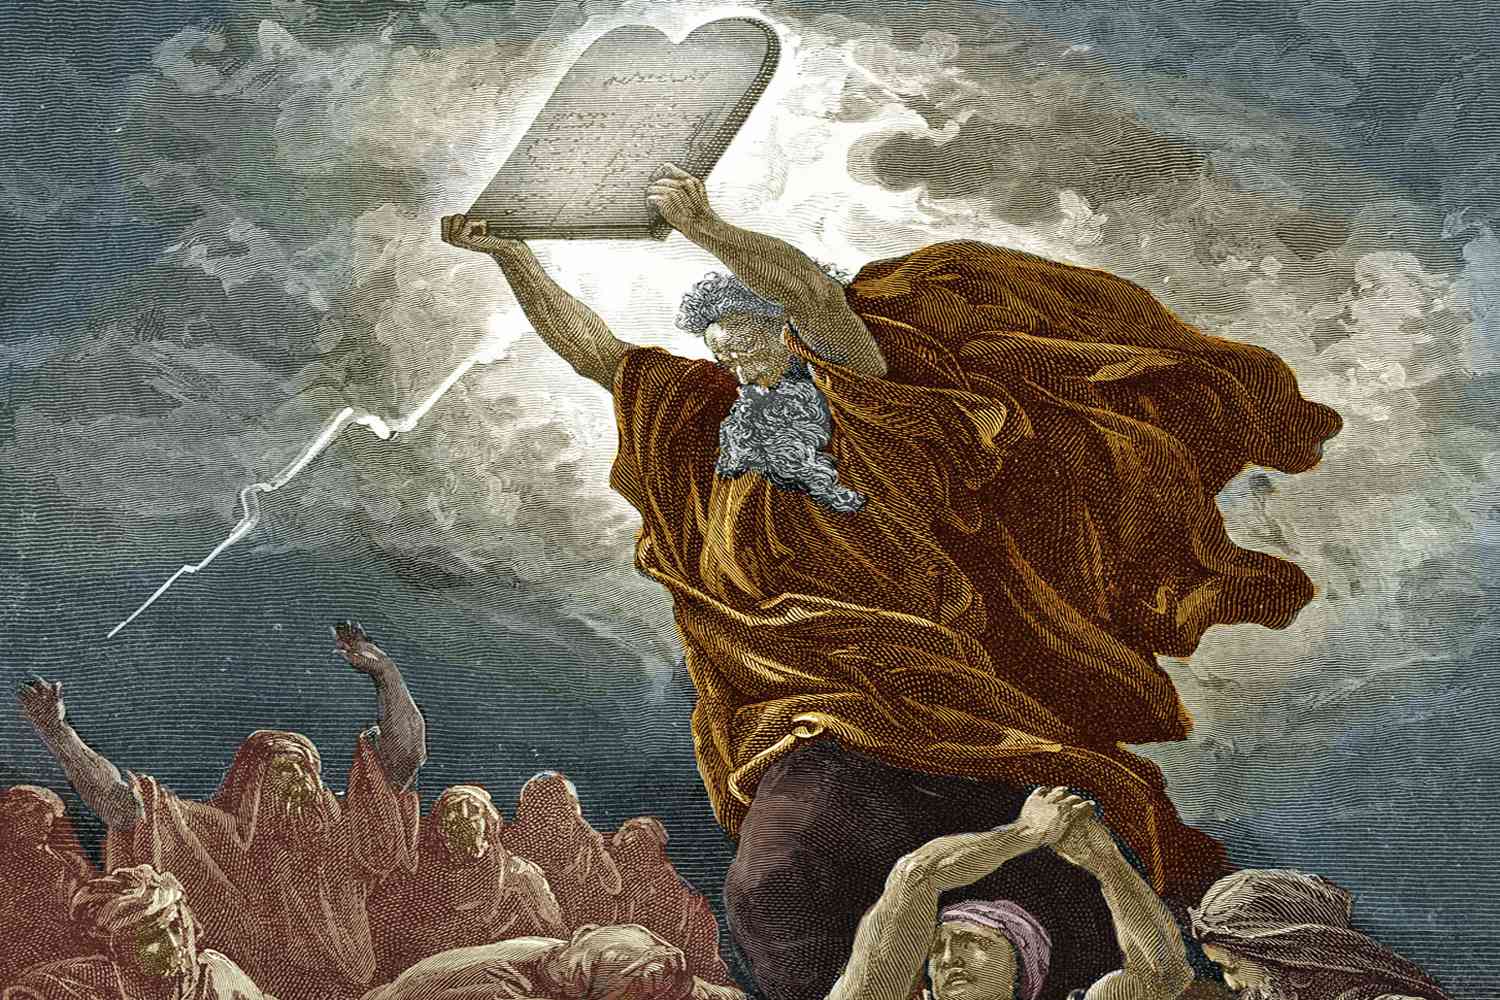 The 10 Commandments and the 613 Laws